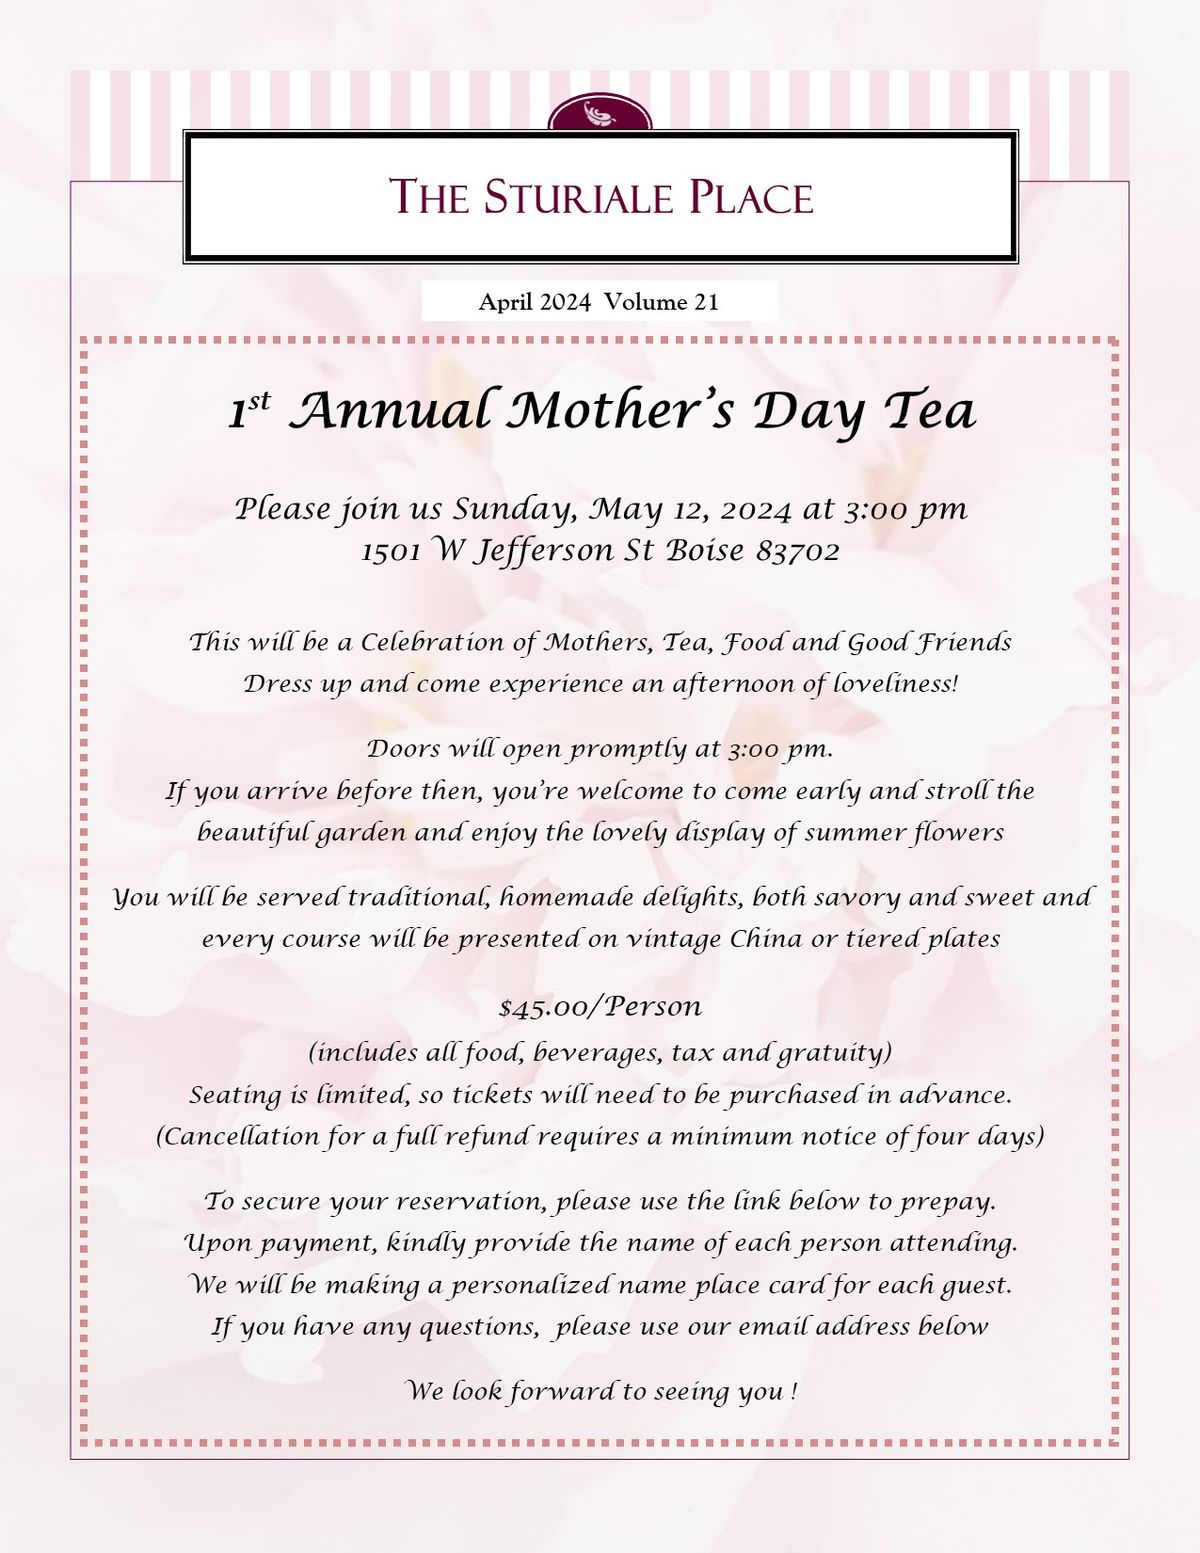 1st Annual Mother's Day Tea